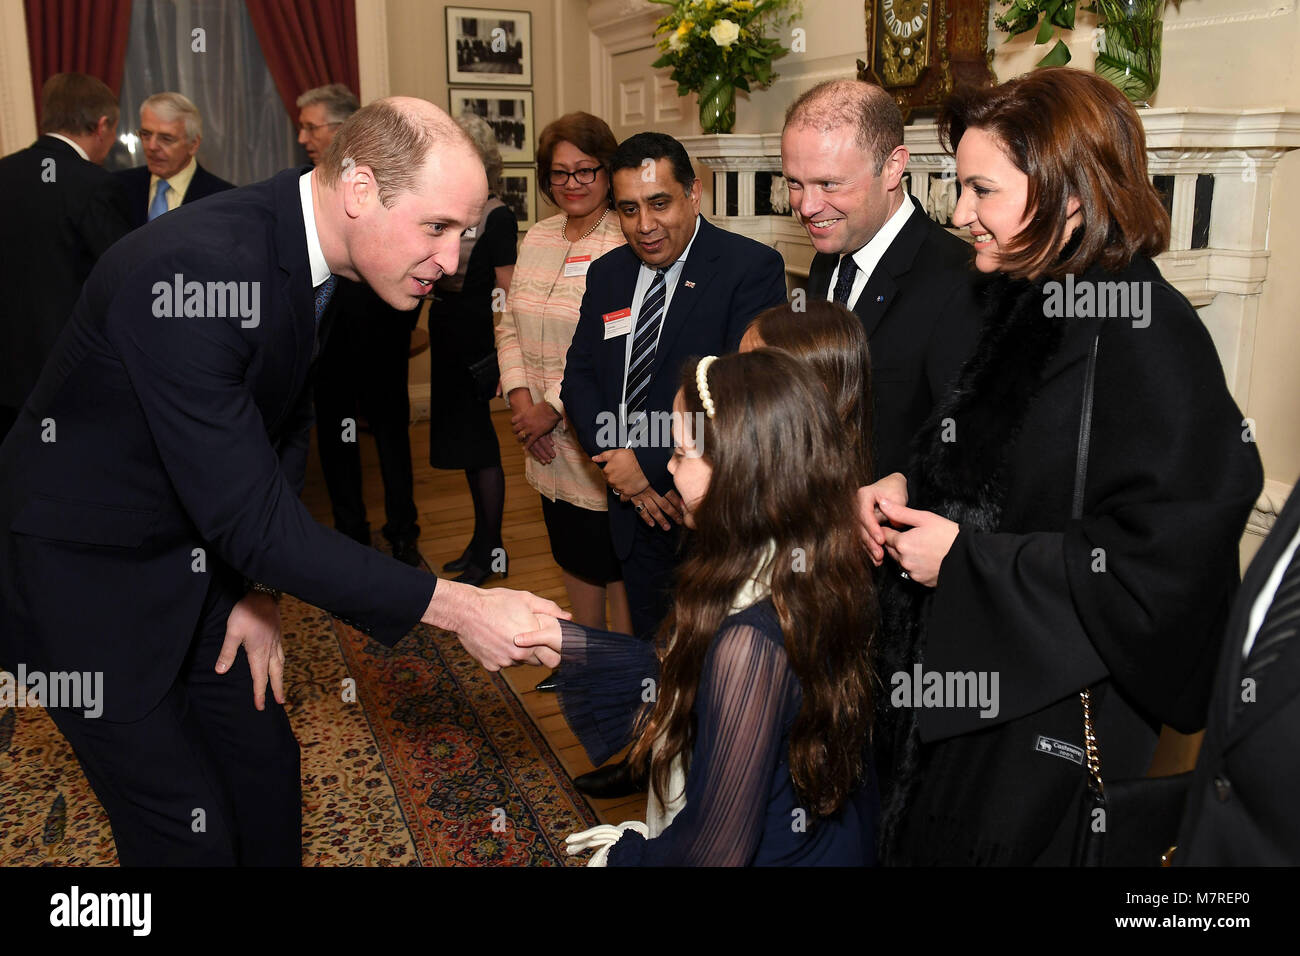 The Duke of Cambridge (left) meets meets meets the Prime Minister of Malta Joseph Muscat, his wife Michelle Muscat and their daughters at a reception held by the Commonwealth Secretary-General, Rt Hon Patricia Scotland QC, at Marlborough House, the home of the Commonwealth Secretariat in London. Stock Photo